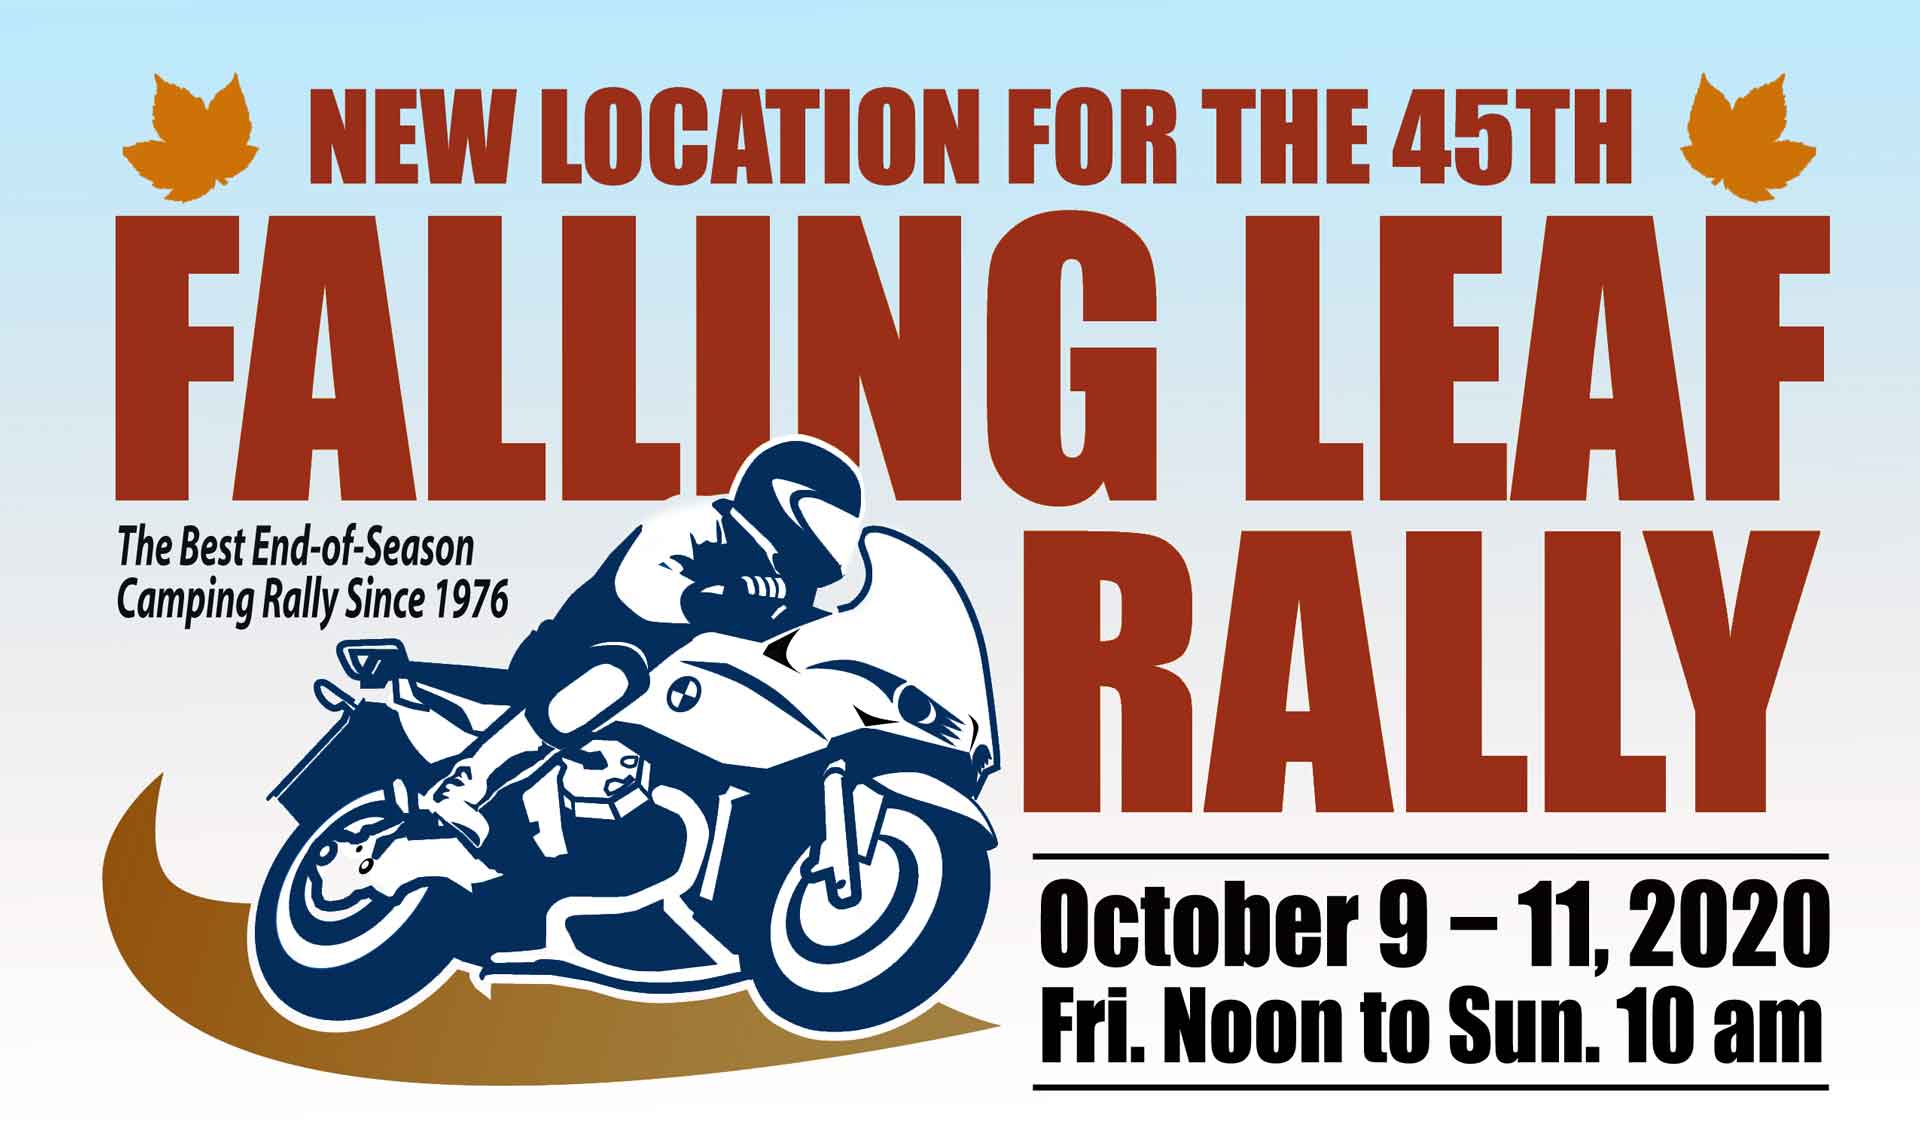 Make Your Plans for the 45th Falling Leaf Rally Gateway Riders